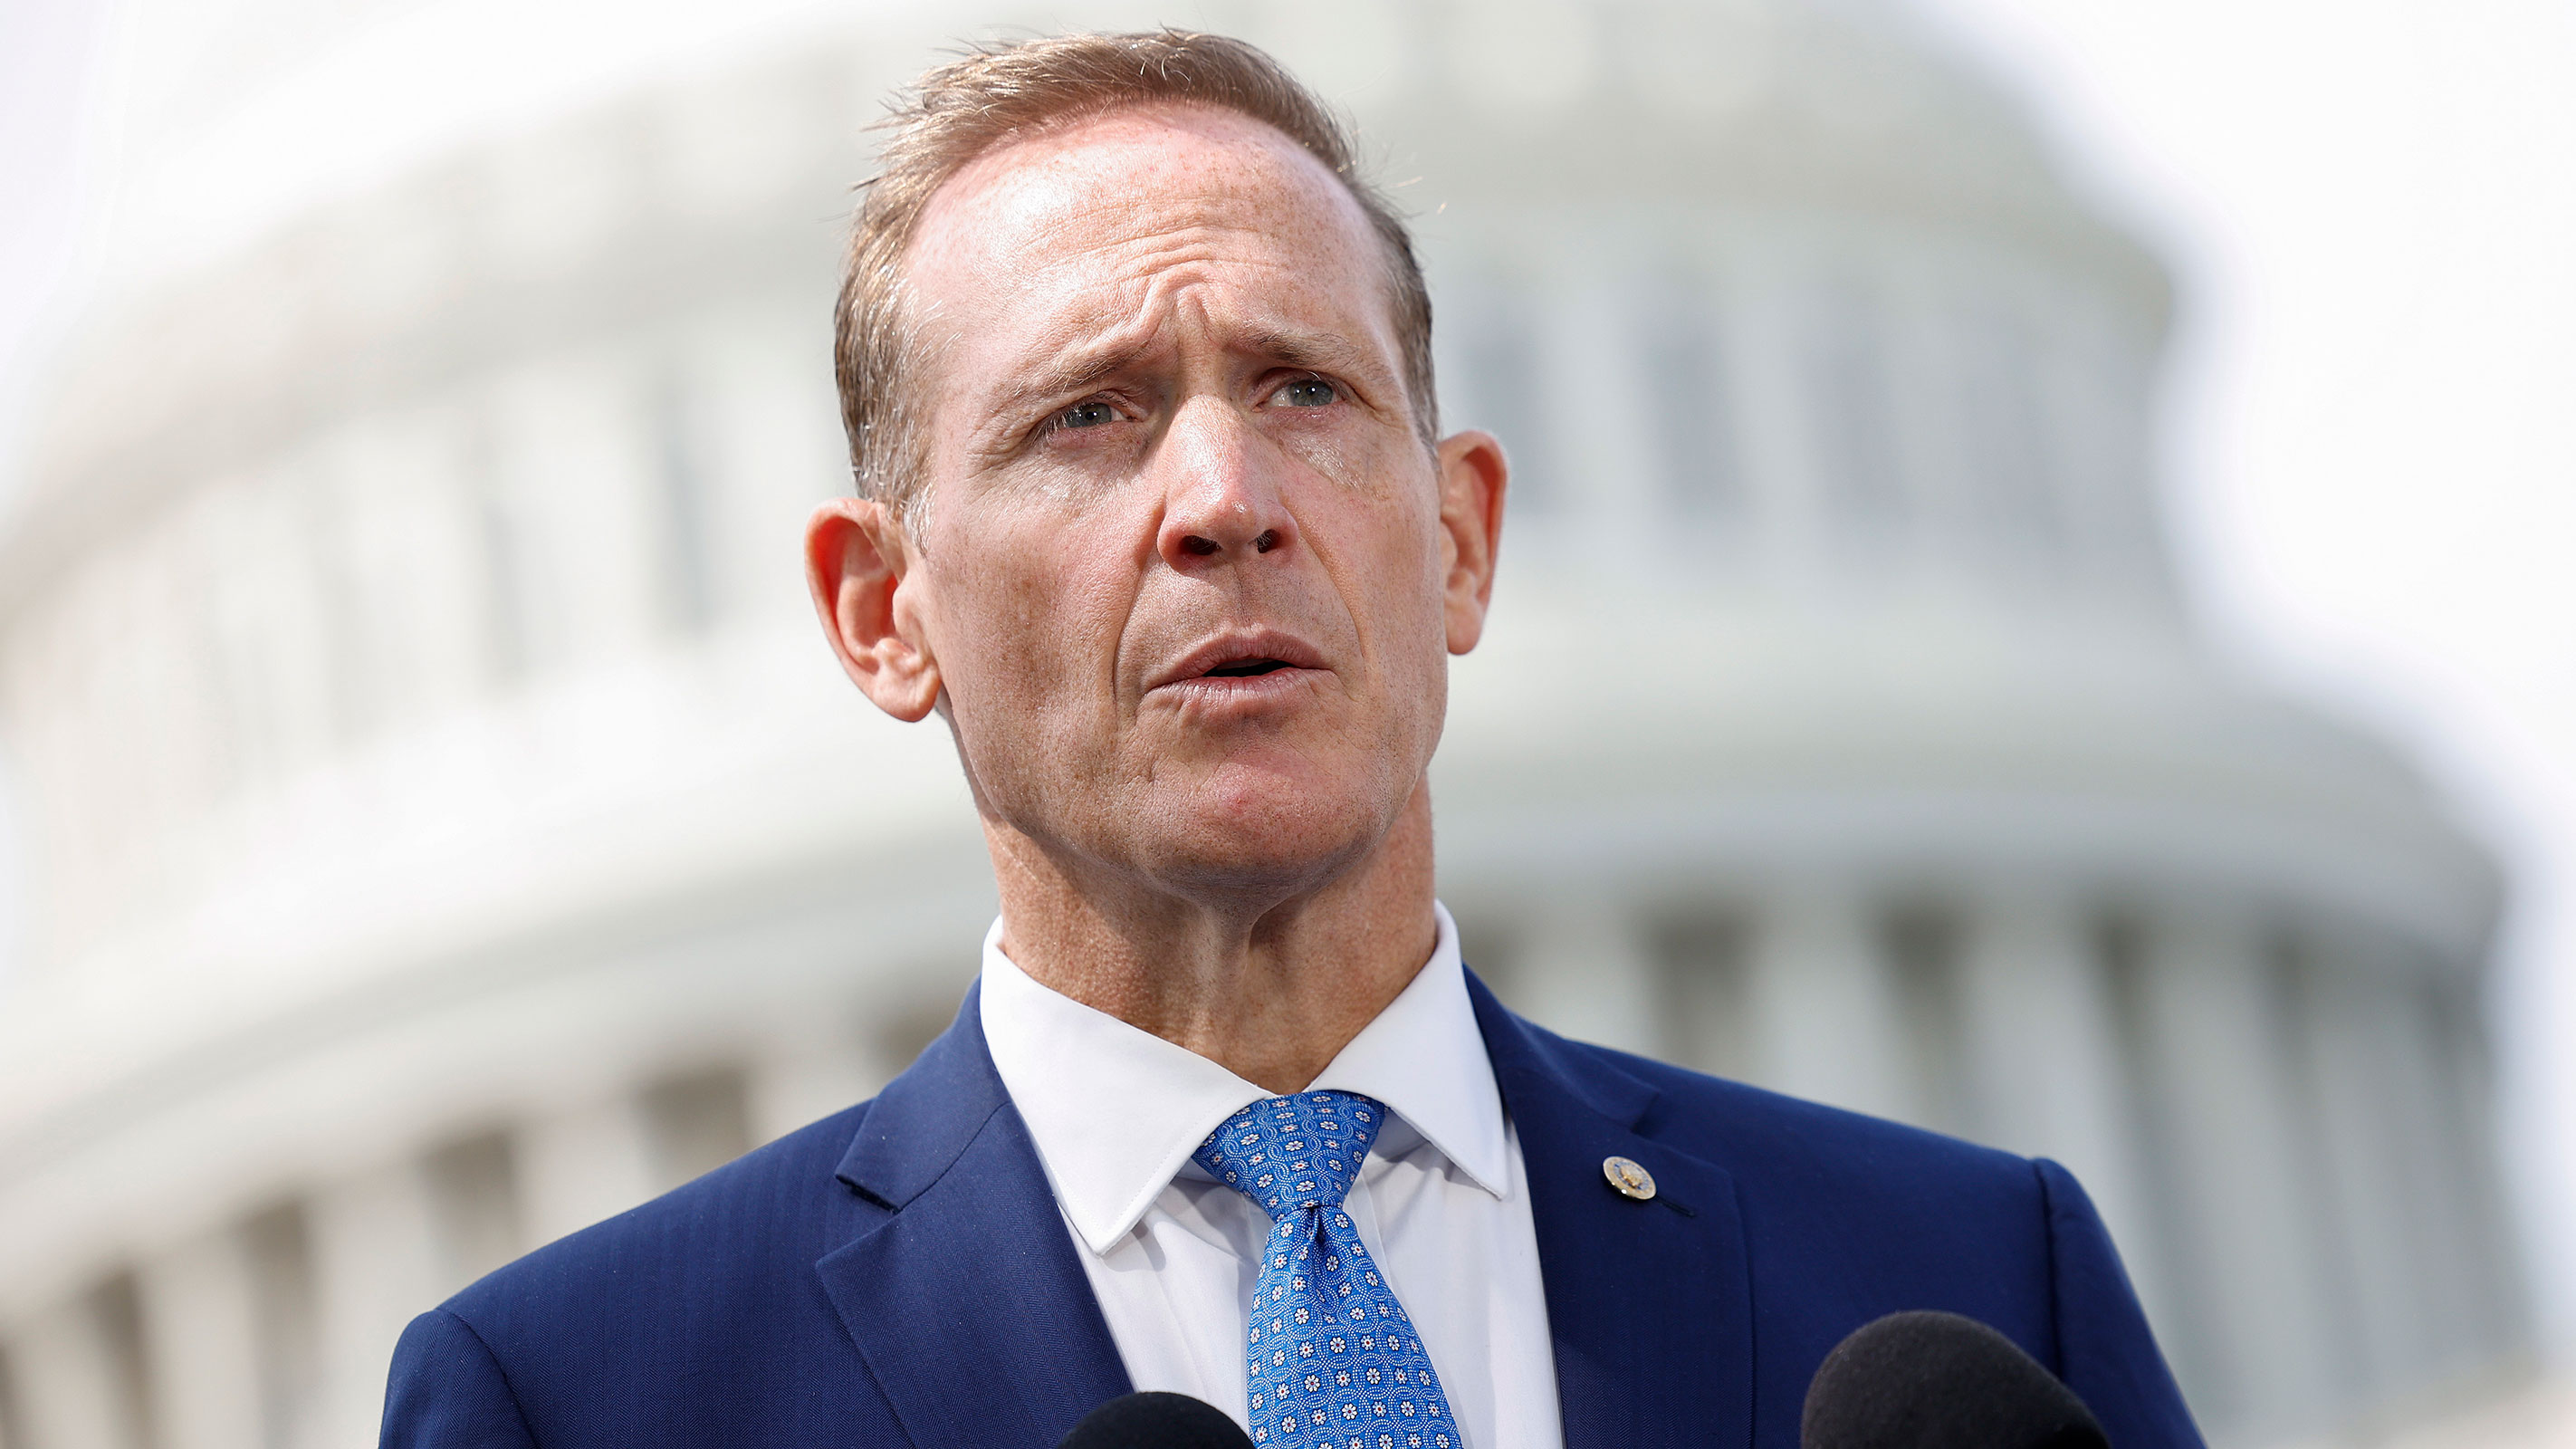 Sen. Ted Budd speaks on border security and Title 42 during a press conference at the U.S. Capitol on May 11, 2023 in Washington, DC.